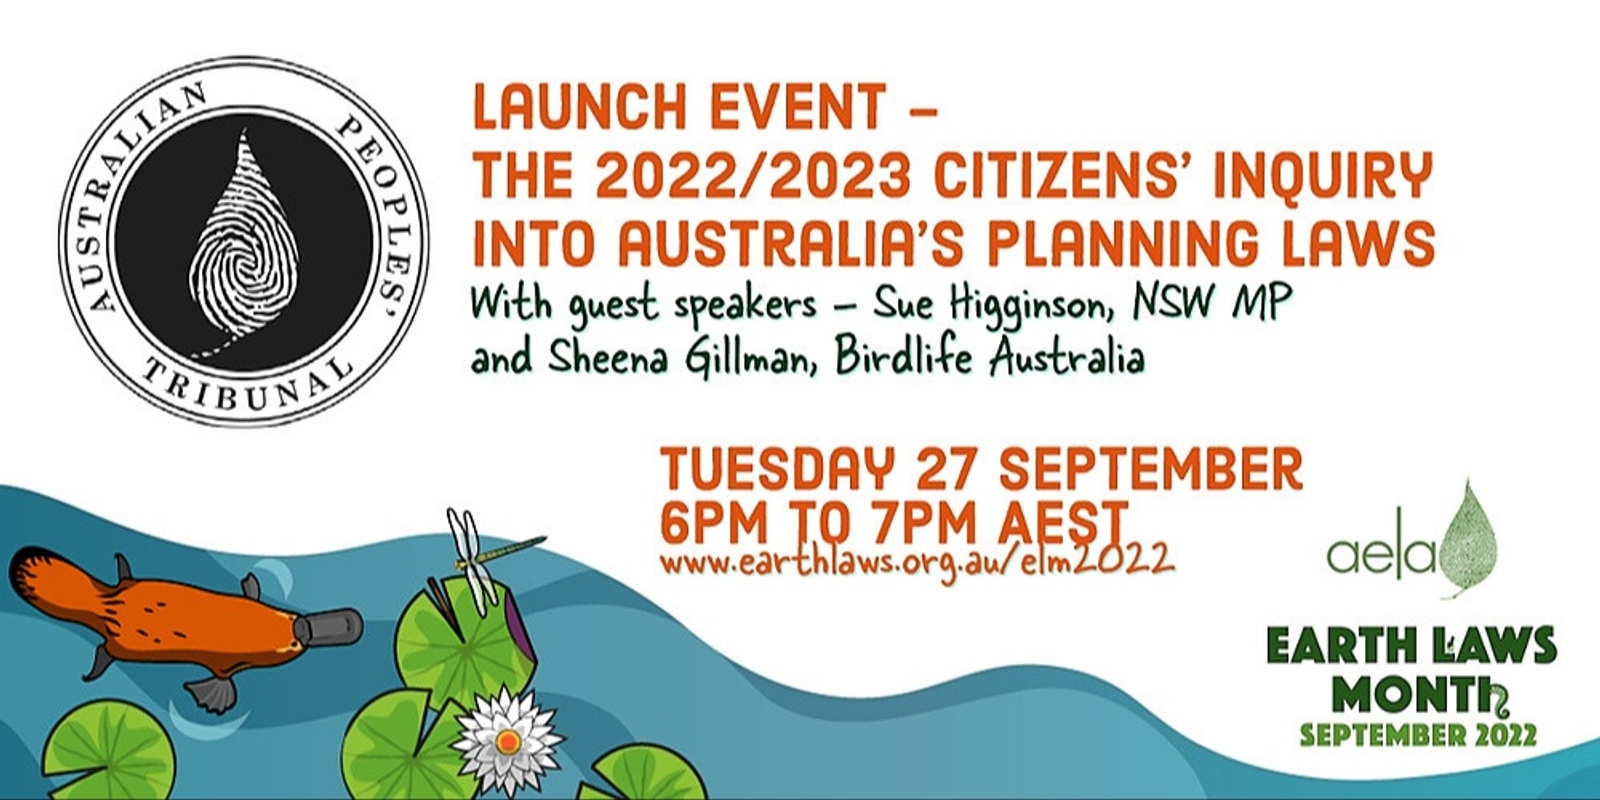 Banner image for LAUNCH EVENT: 2022/2023 Citizens' Inquiry into Australia's Planning Laws